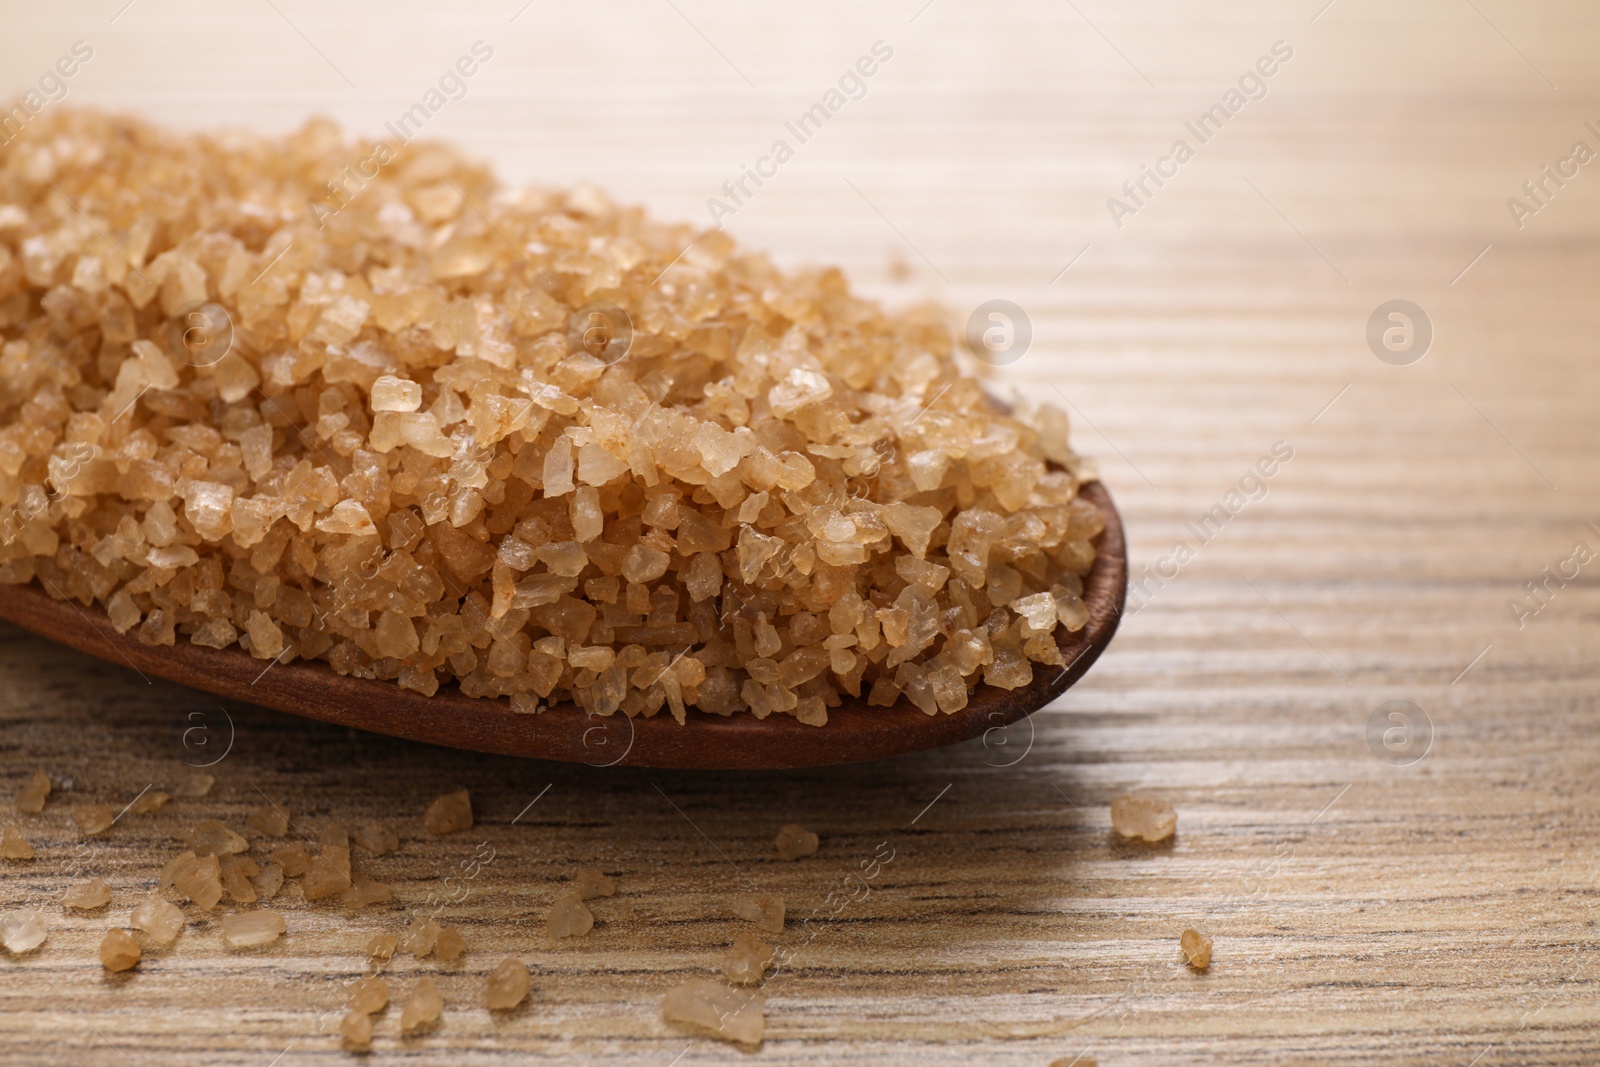 Photo of Wooden spoon with salt for spa scrubbing procedure on wooden table, closeup